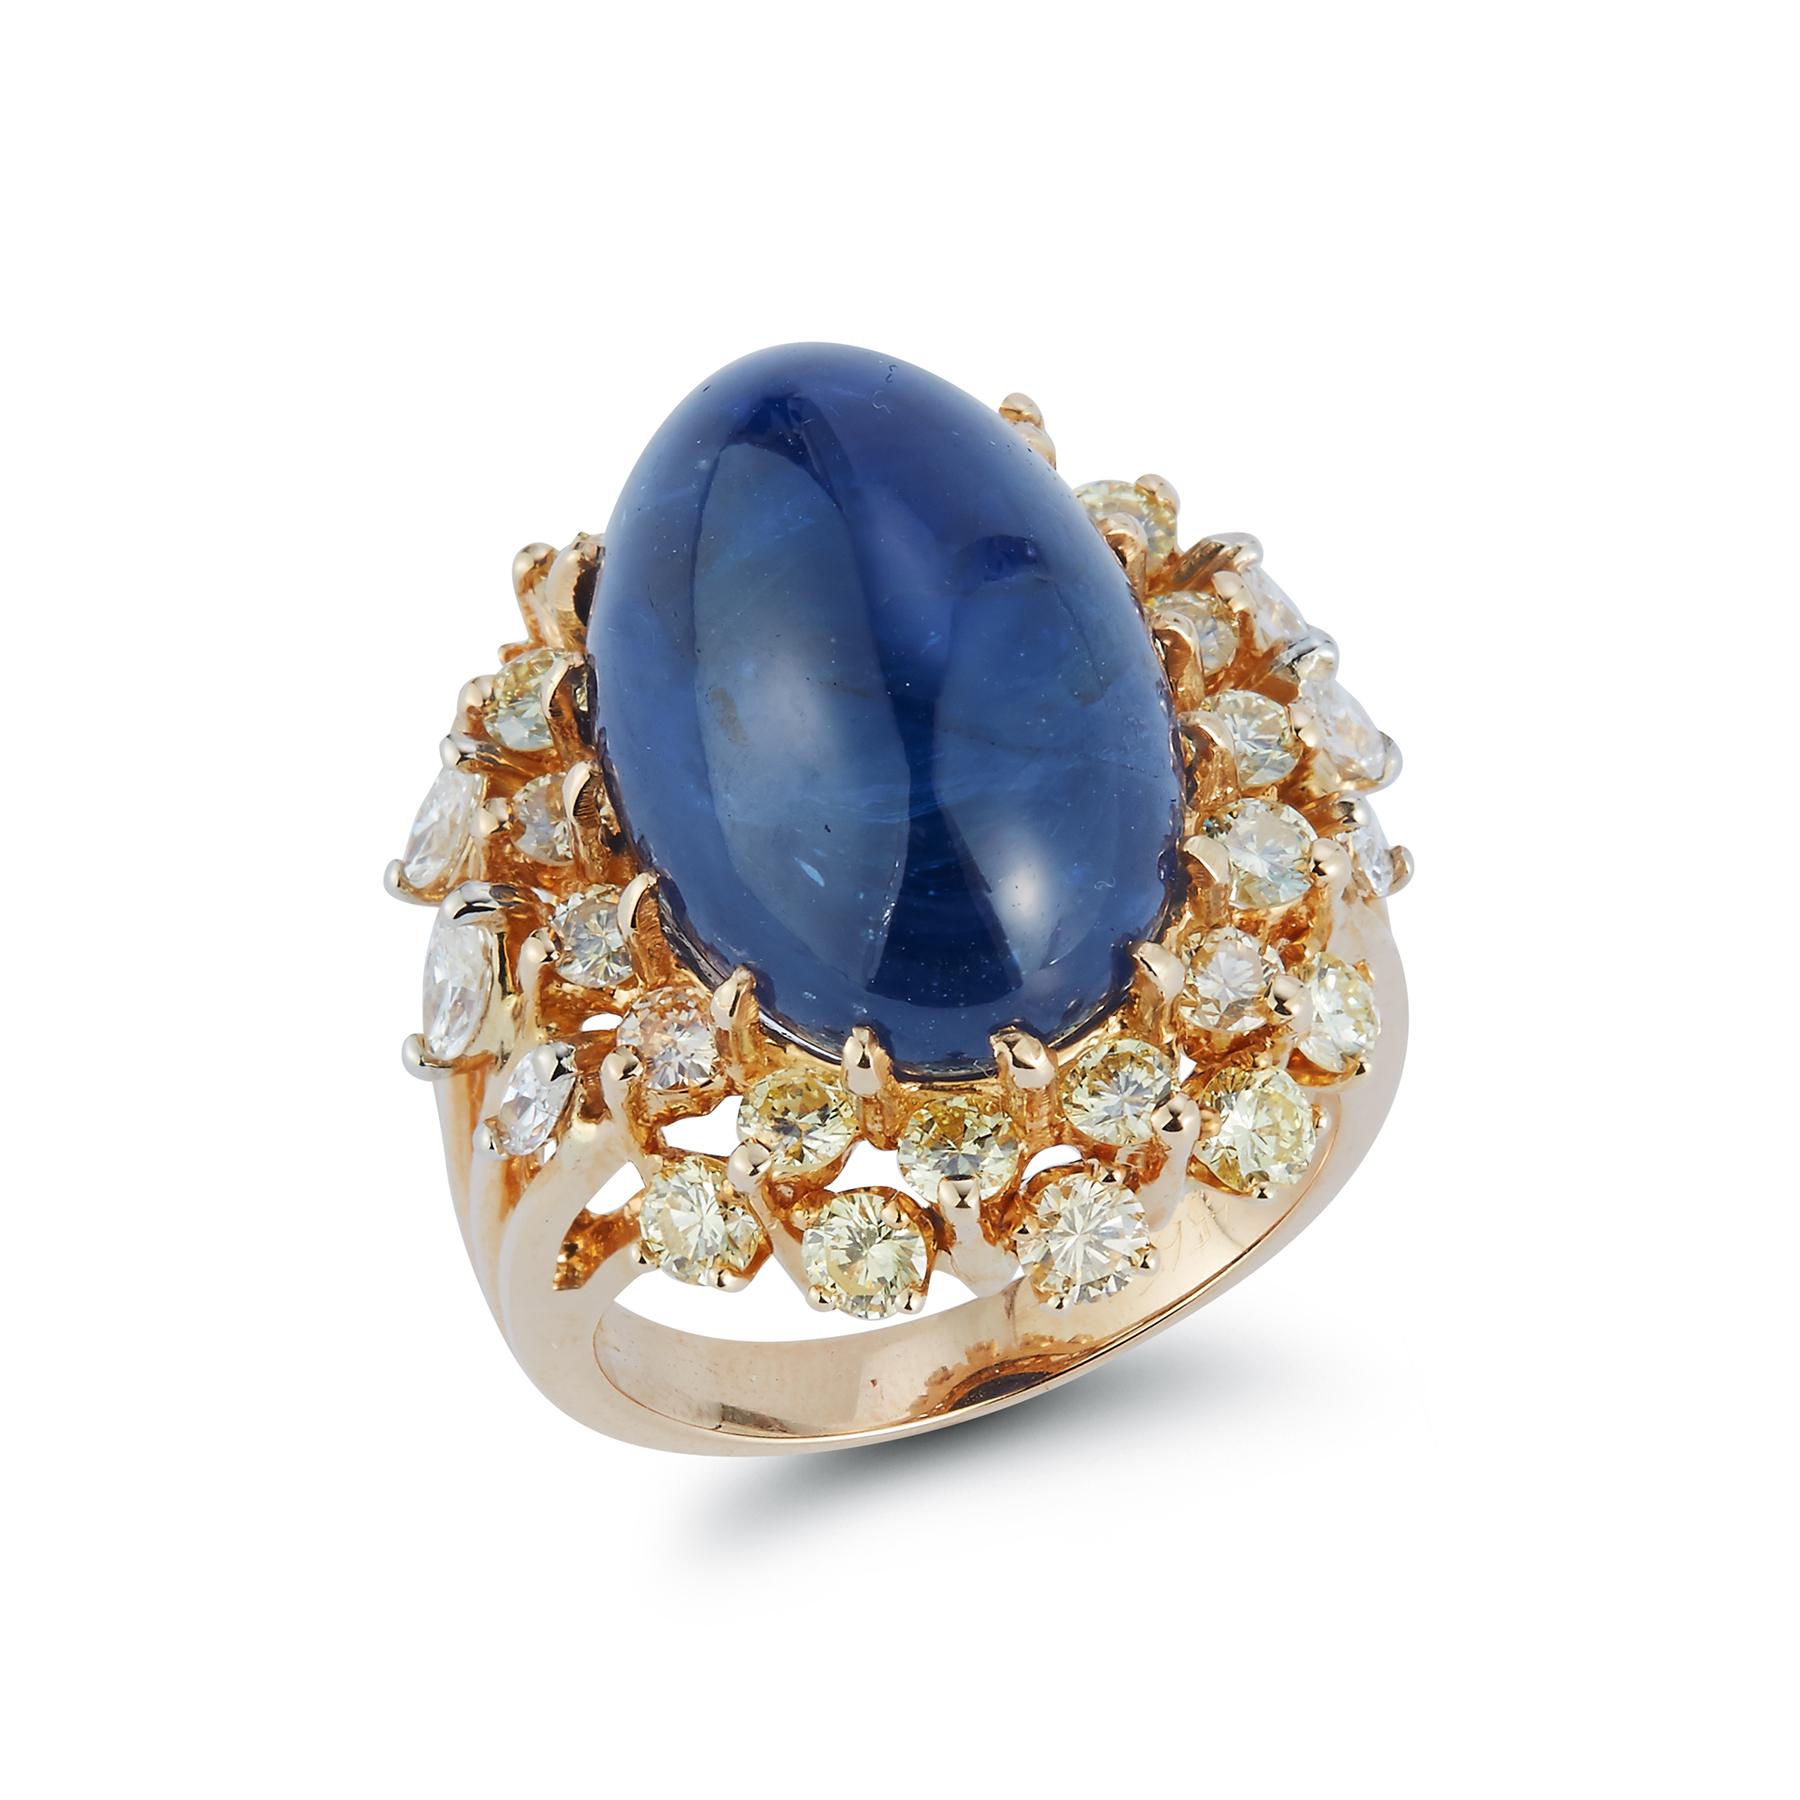  Cabochon Sapphire & Diamond Ring

 AGL certified Cabochon Sapphire  25.59 cts surrounded by a stunning array of Diamonds including 6 Marquise Diamonds & Round Cut Diamonds

Ring Size: 5.75

Resizable Free of Charge